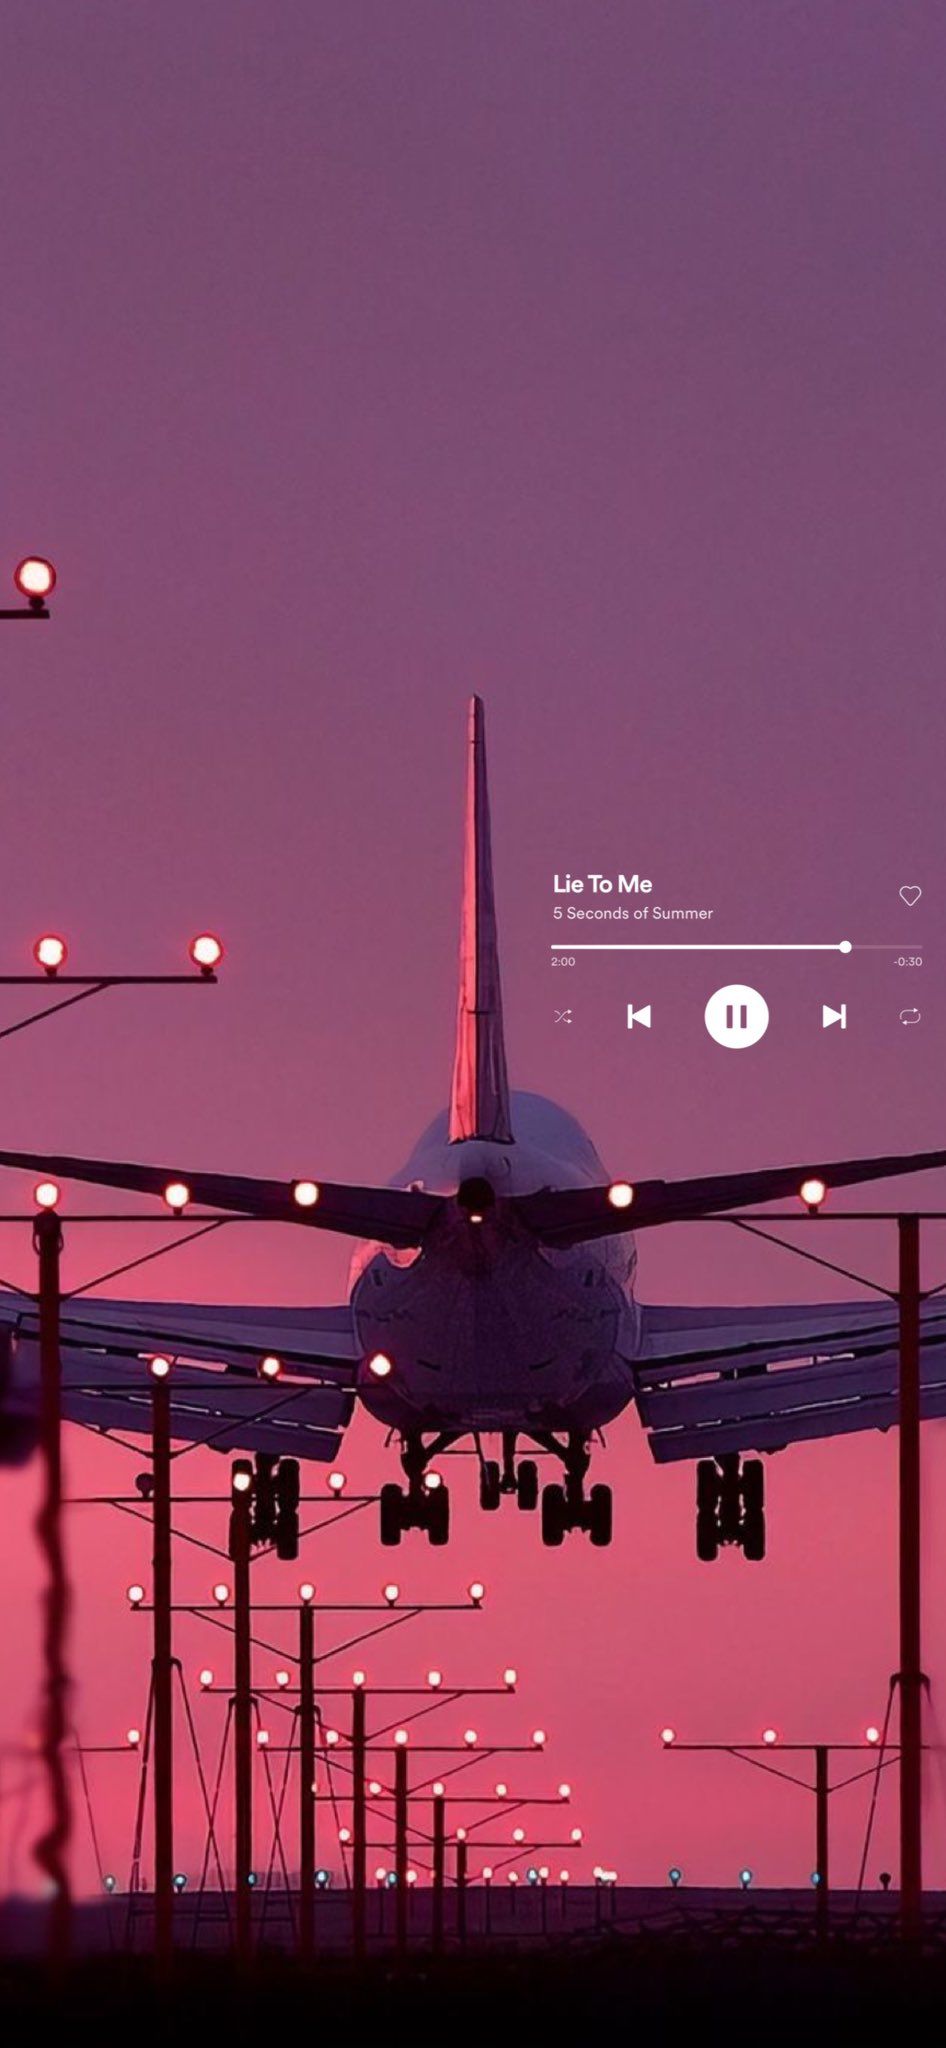 IPhone wallpaper of a plane landing at sunset with a song playing - Spotify